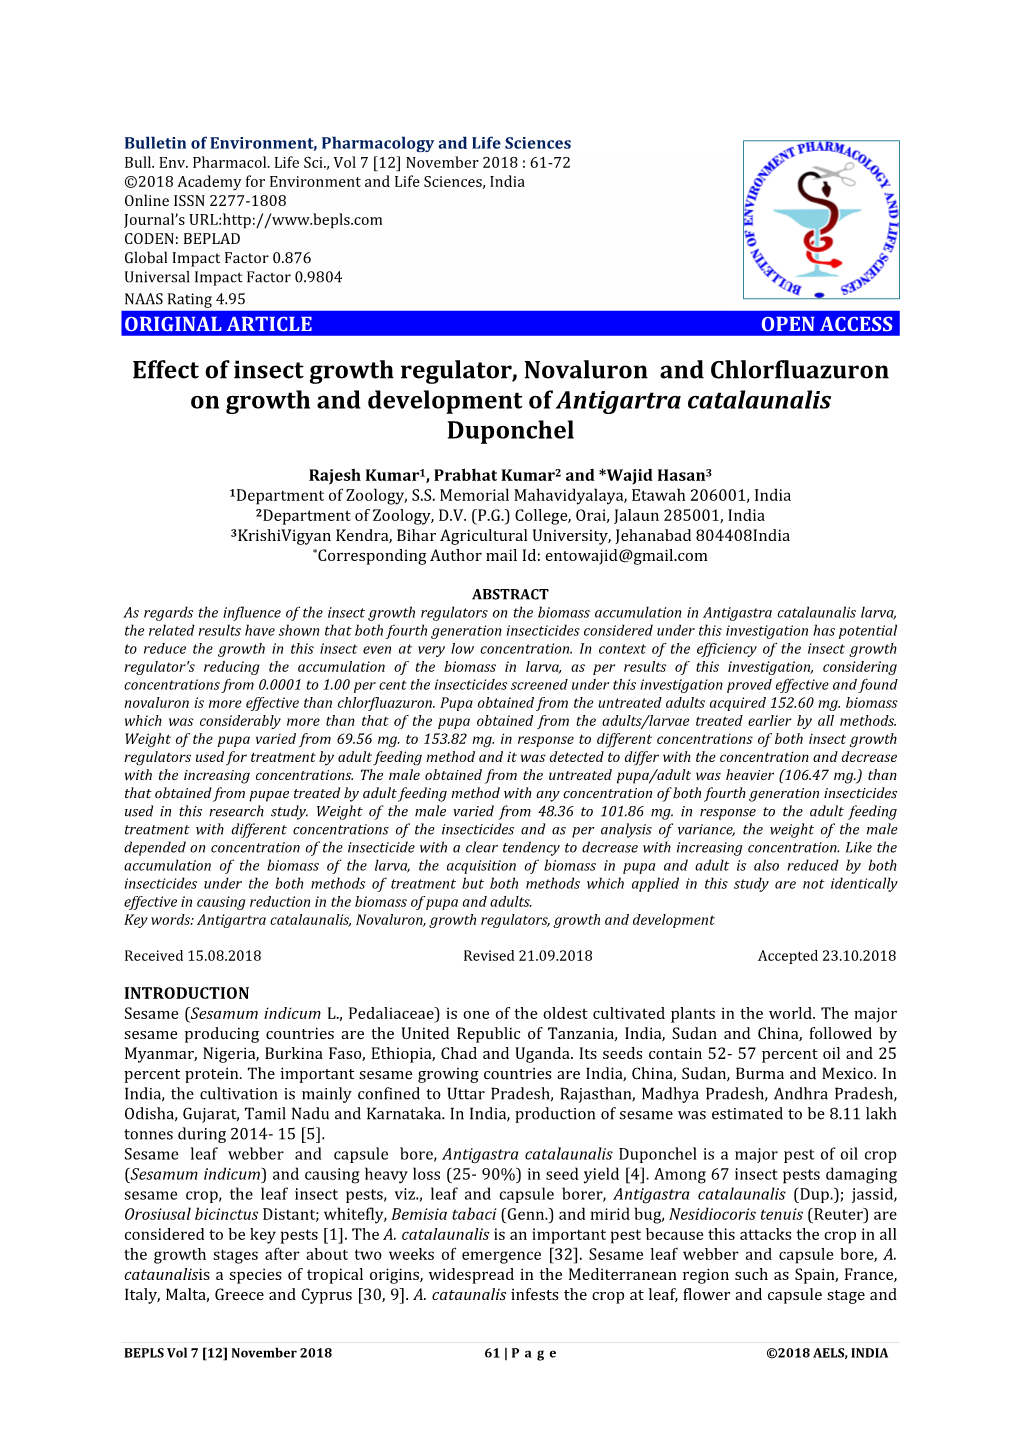 Effect of Insect Growth Regulator, Novaluron and Chlorfluazuron on Growth and Development of Antigartra Catalaunalis Duponchel